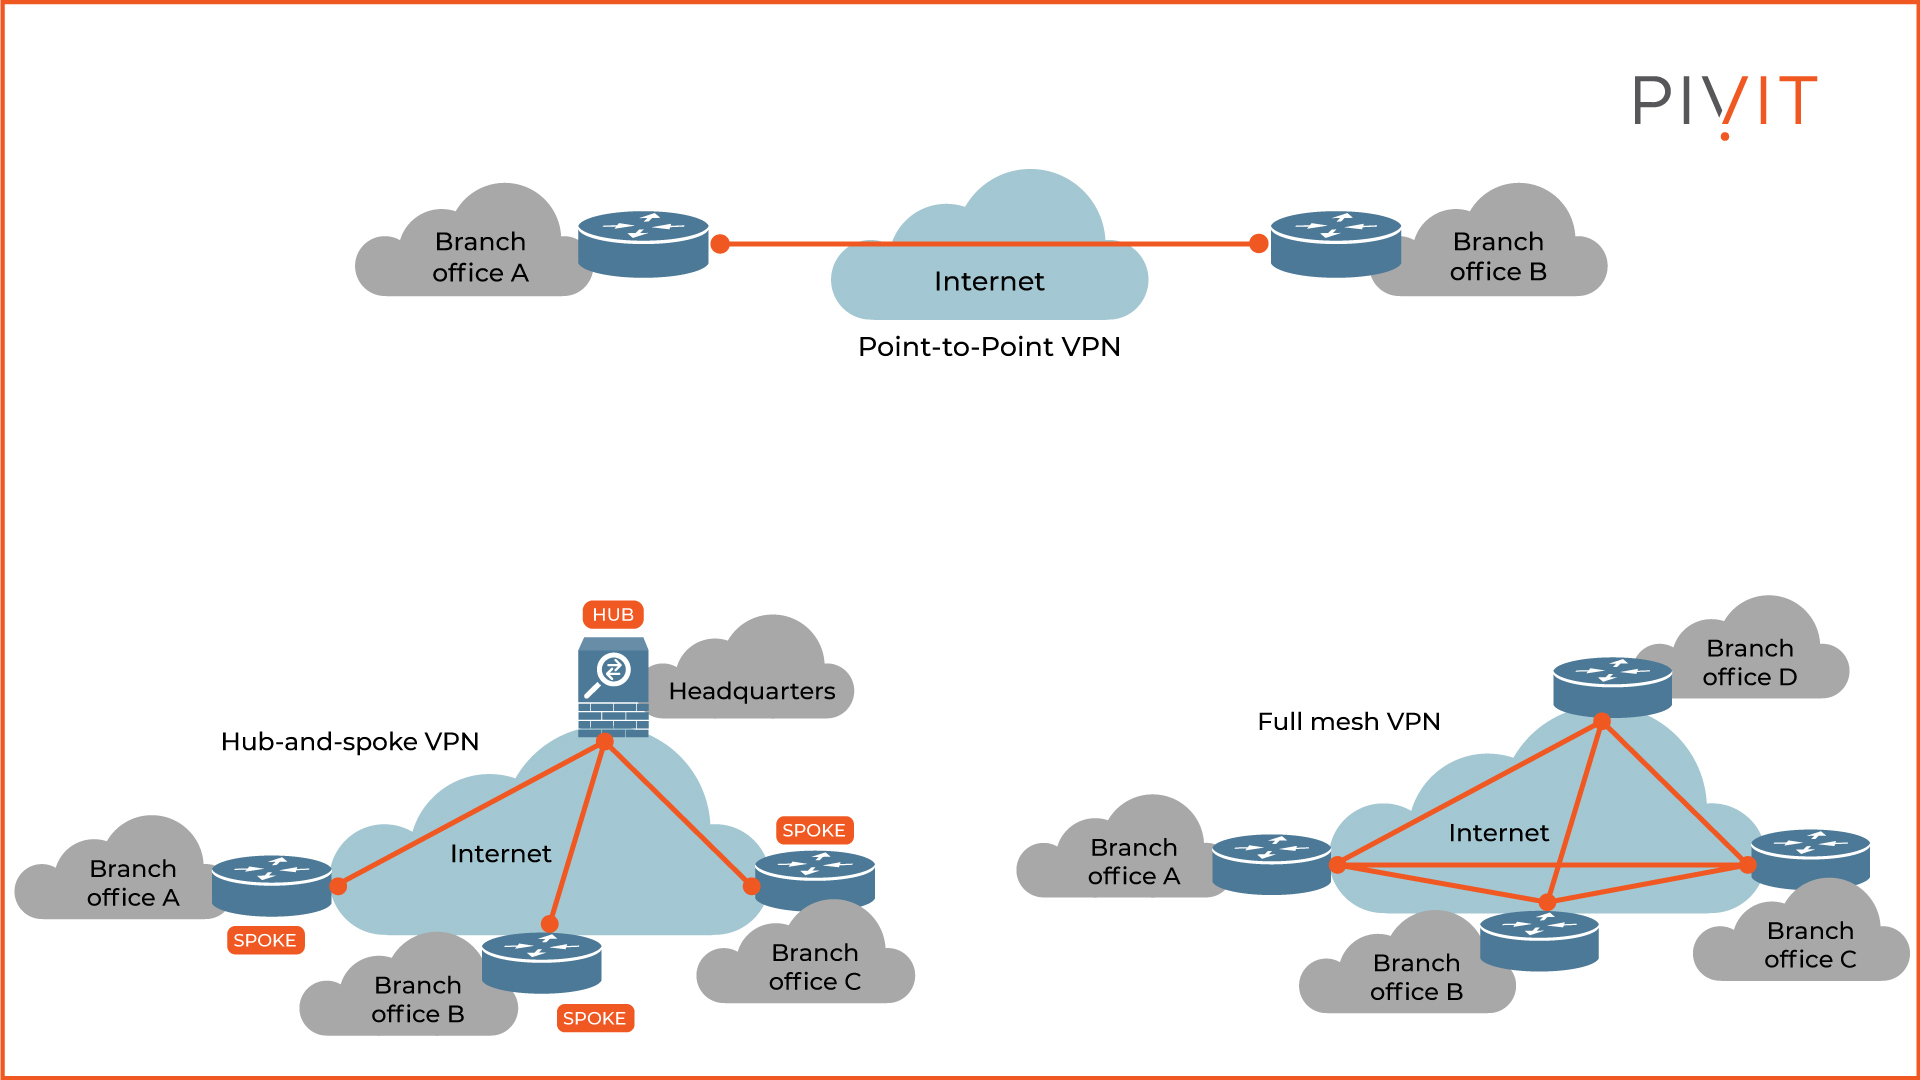 Support for hub-and-spoke, point-to-point and full mesh VPN topologies